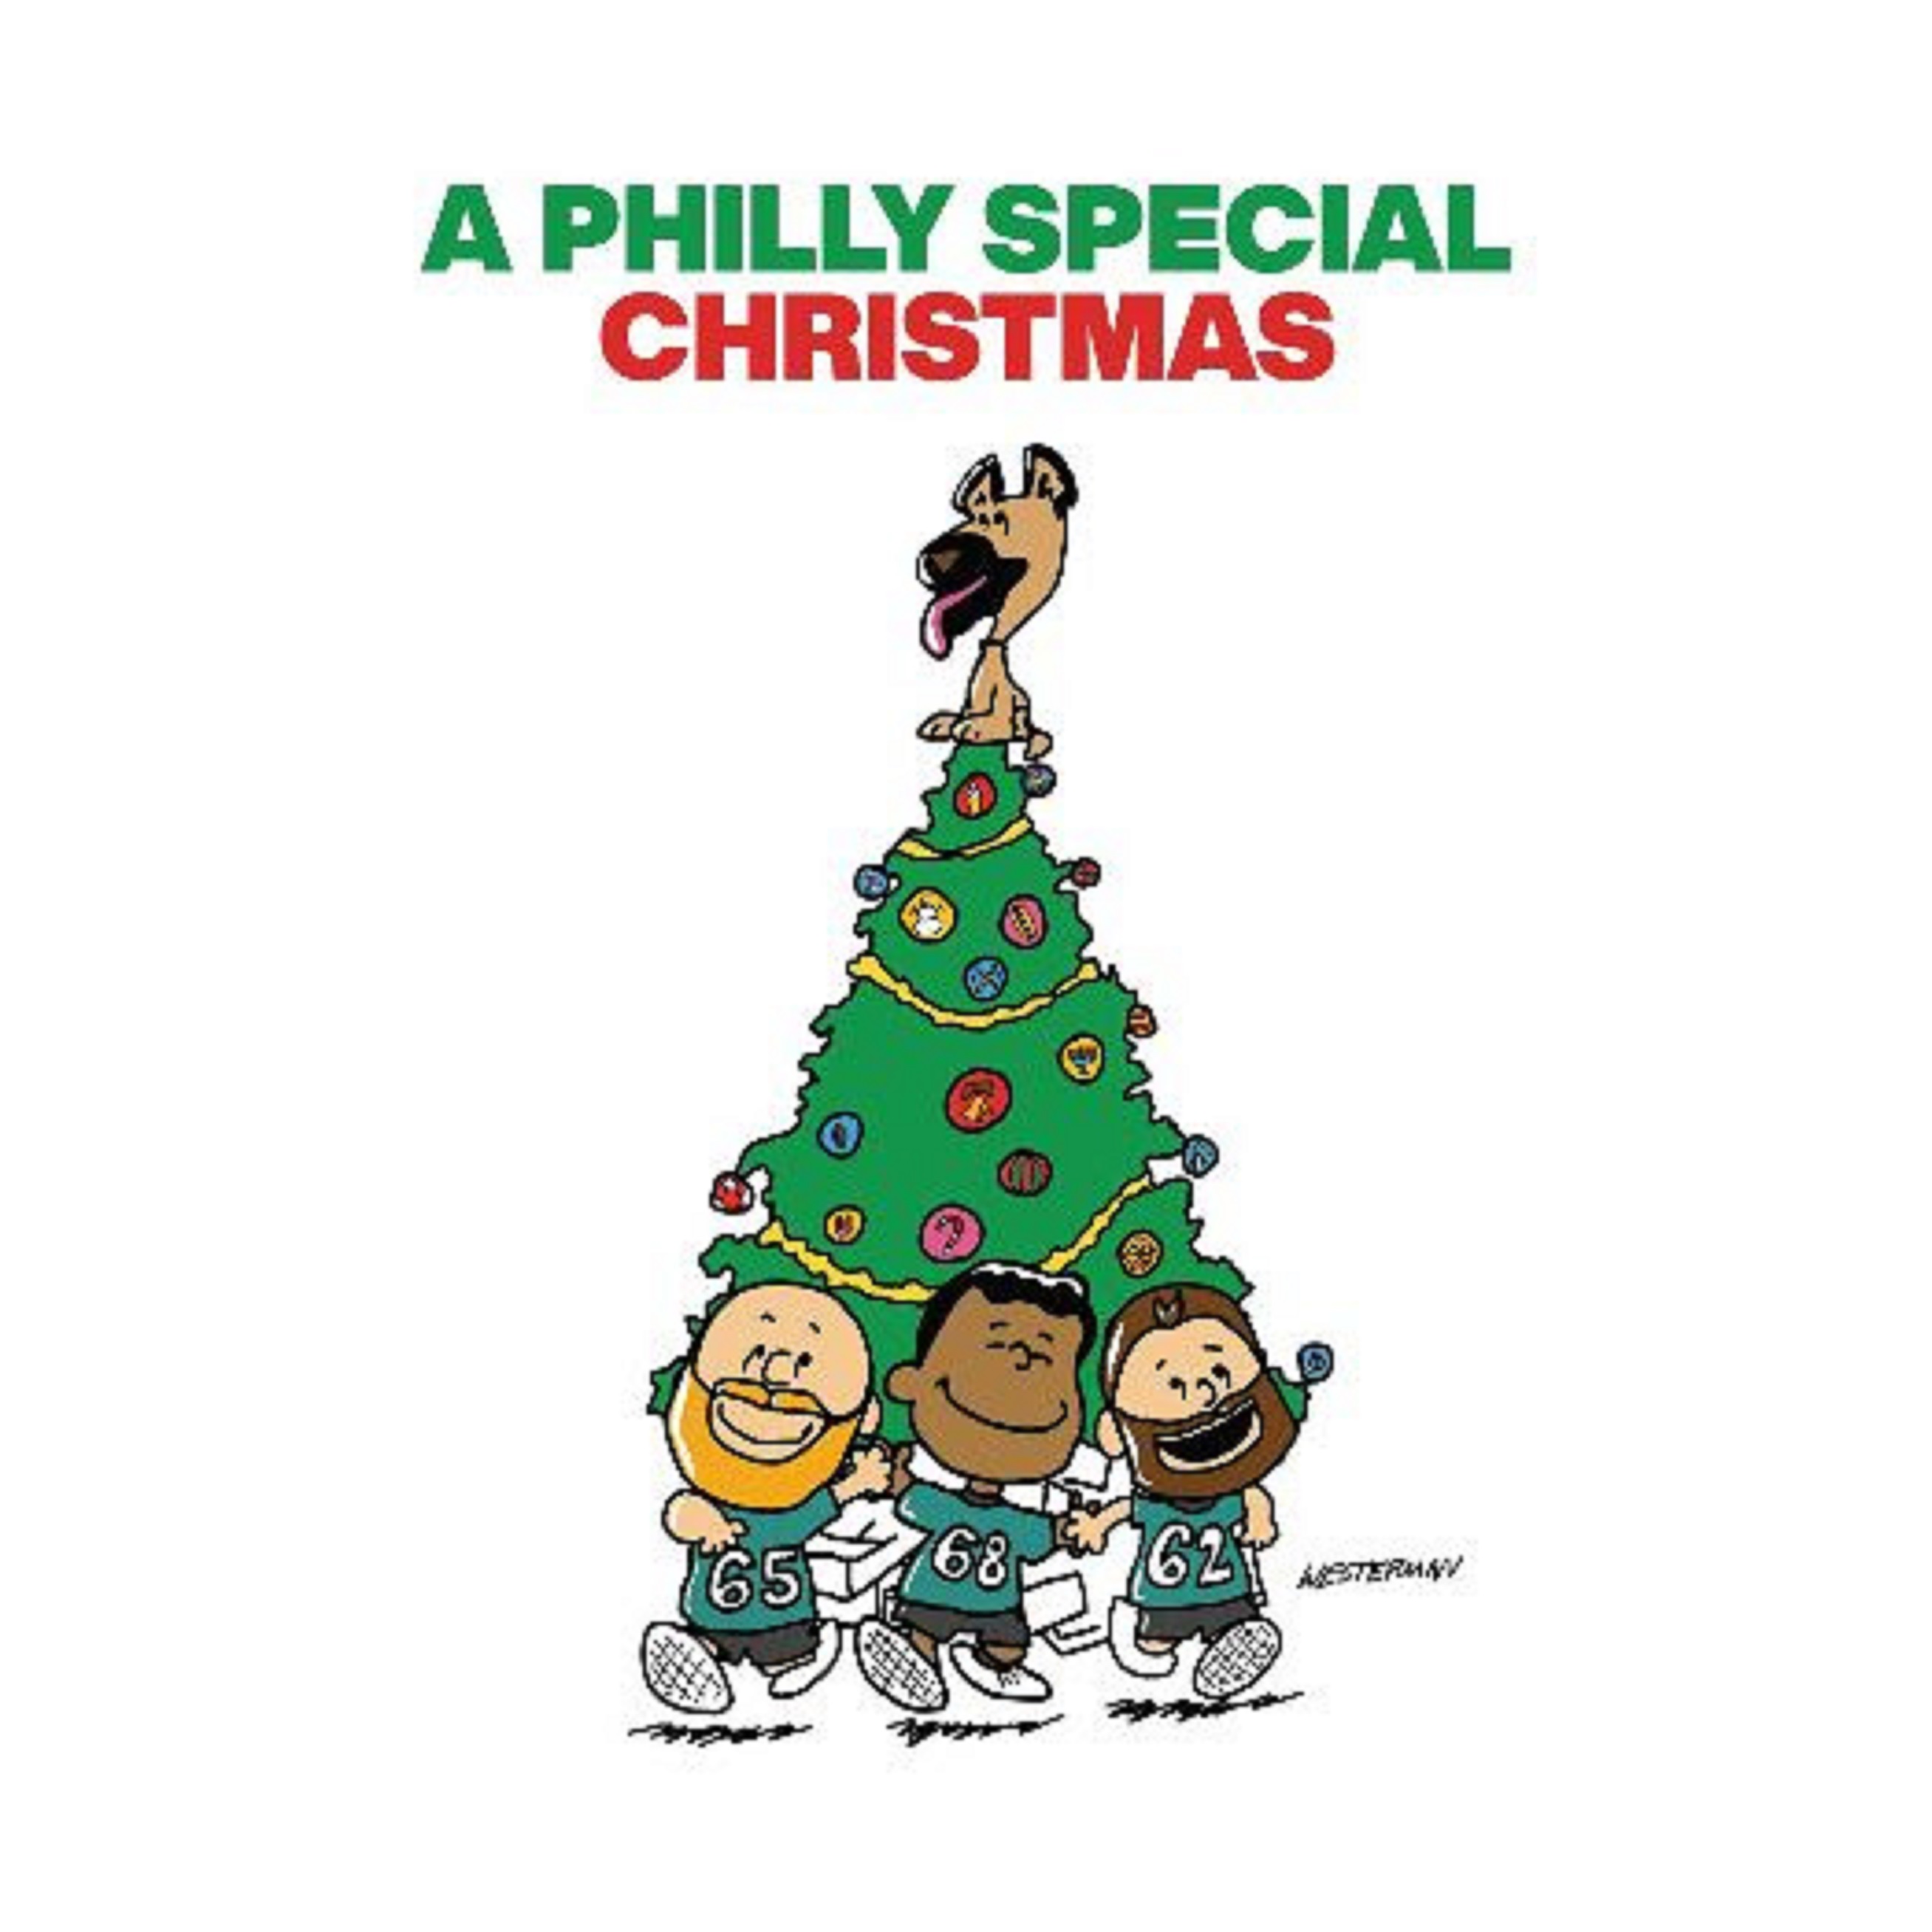 Christmas (Baby Please Come Home) From A Philly Special Christmas is Out NOW!